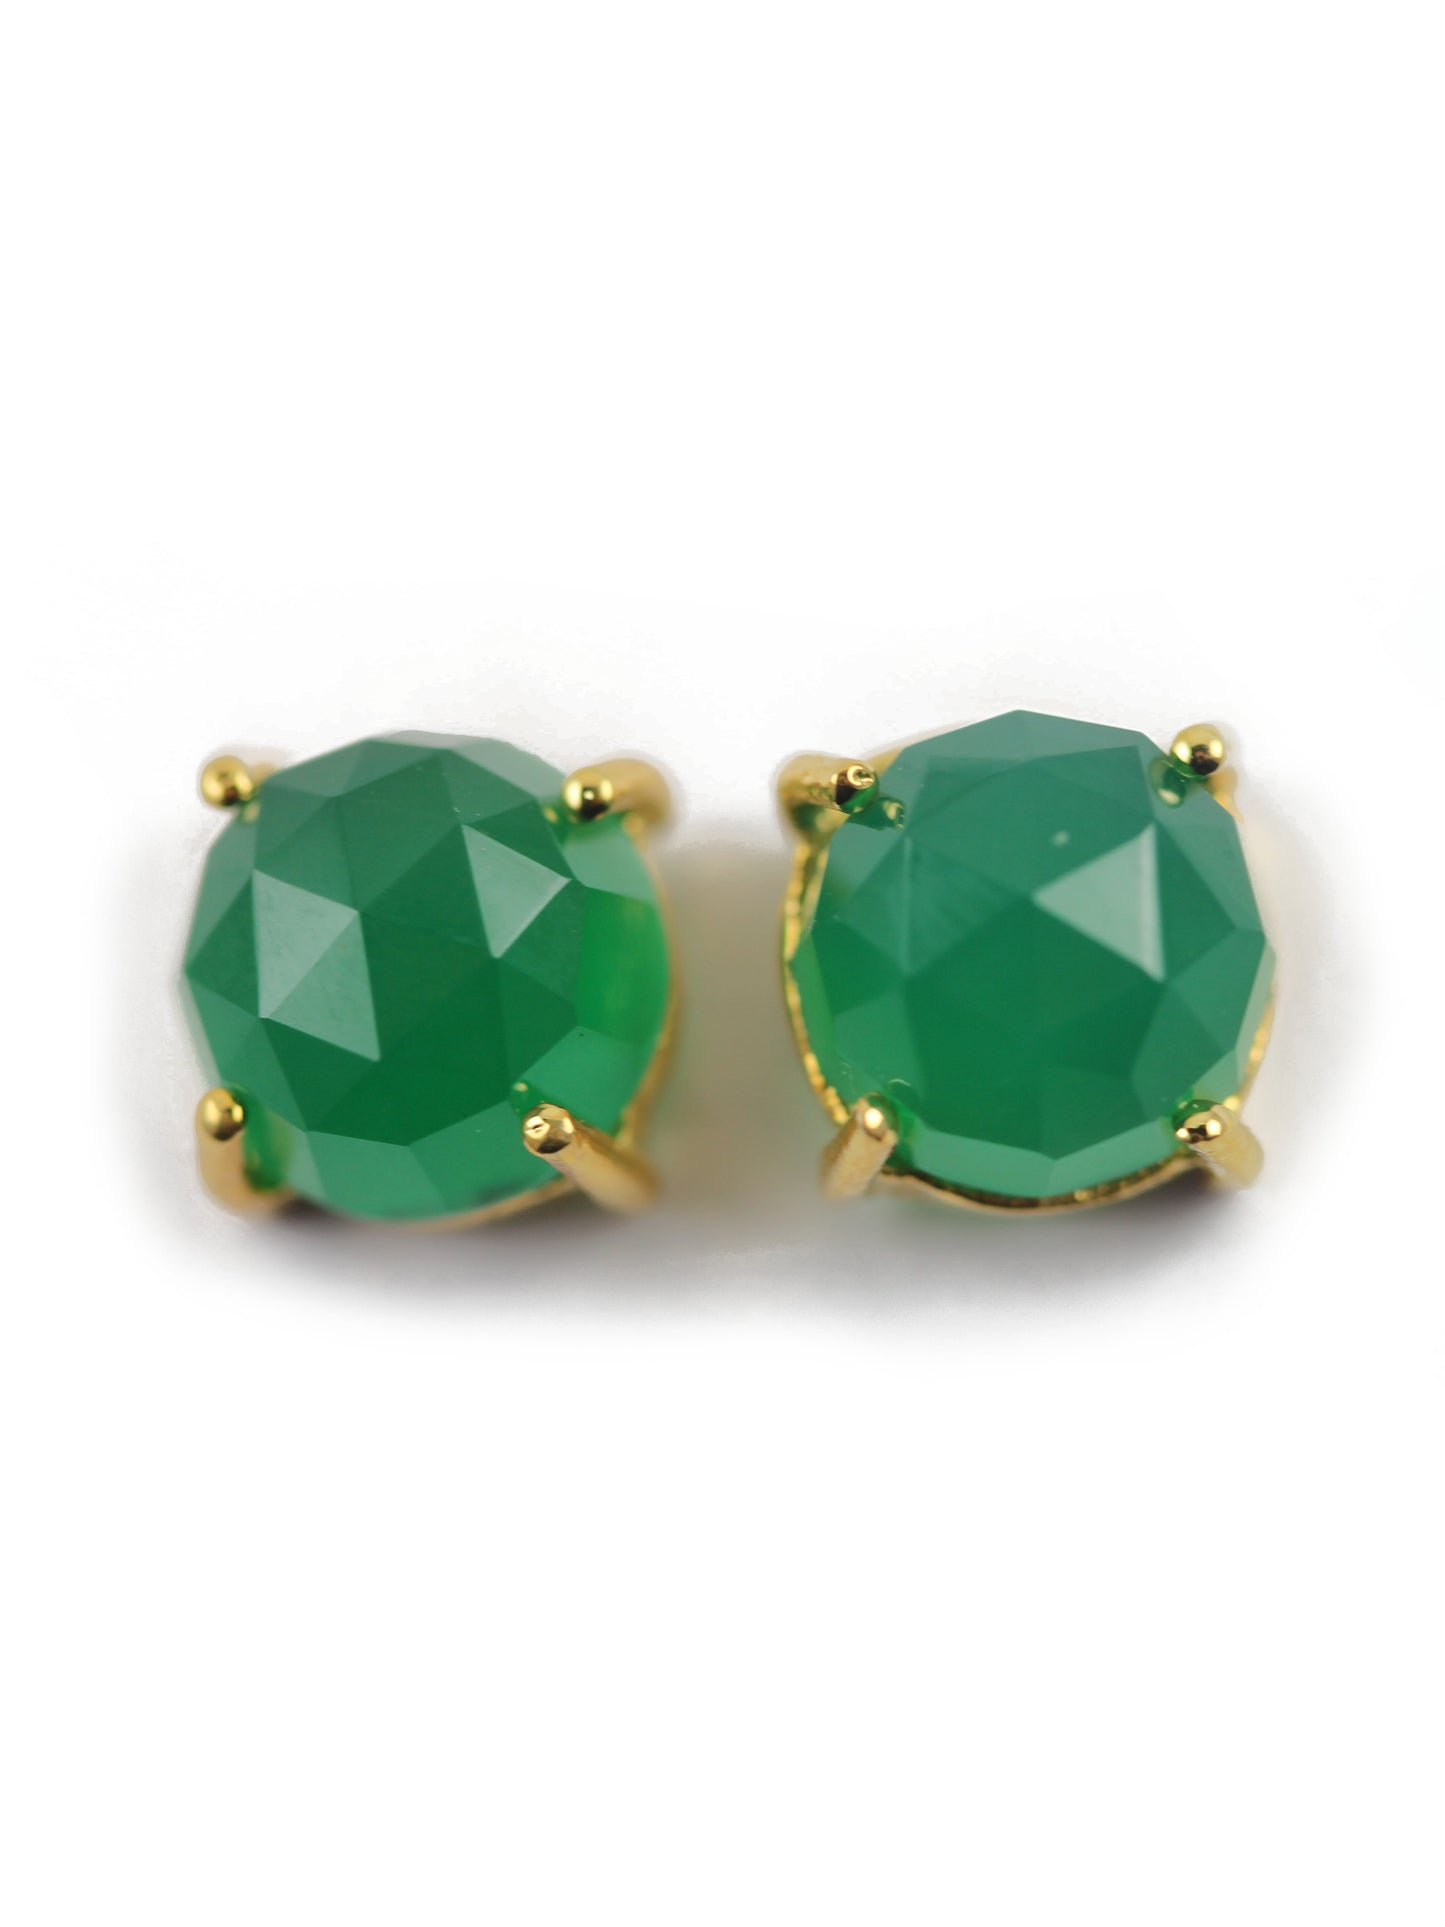 earring studs in natural chalcedony green faceted stones in prong settings - Meena Design